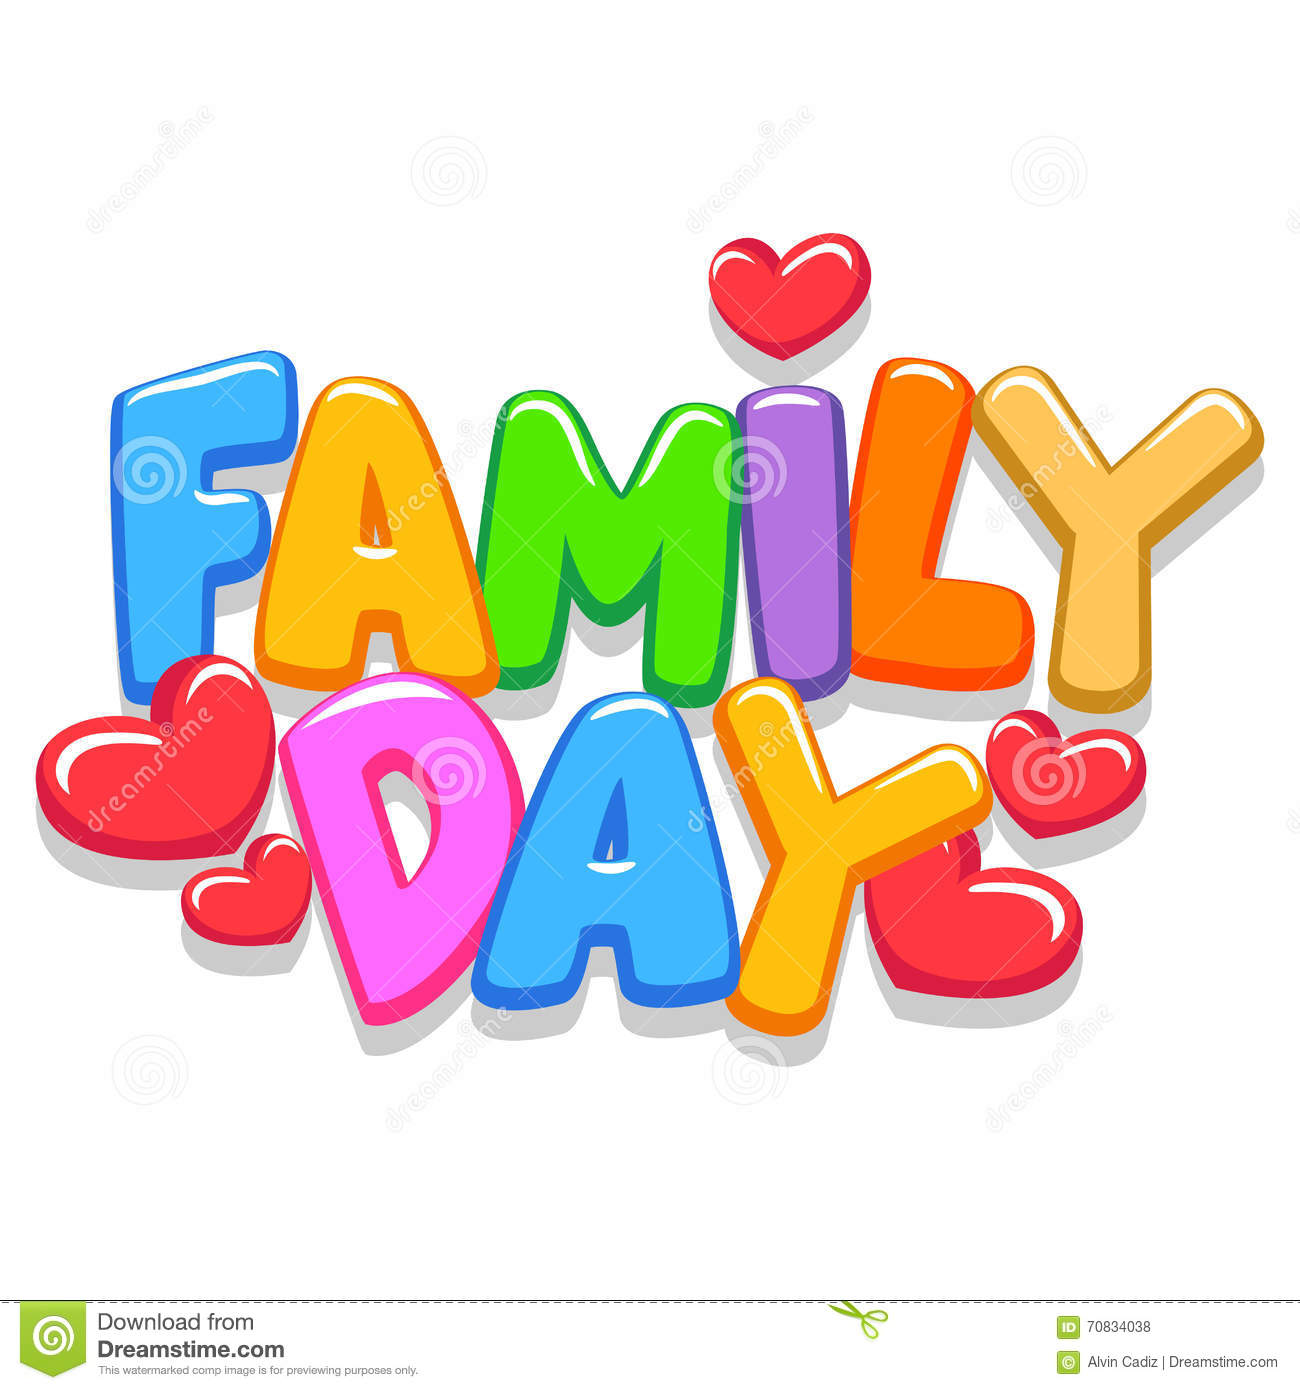 family-day-clipart-free-clipground